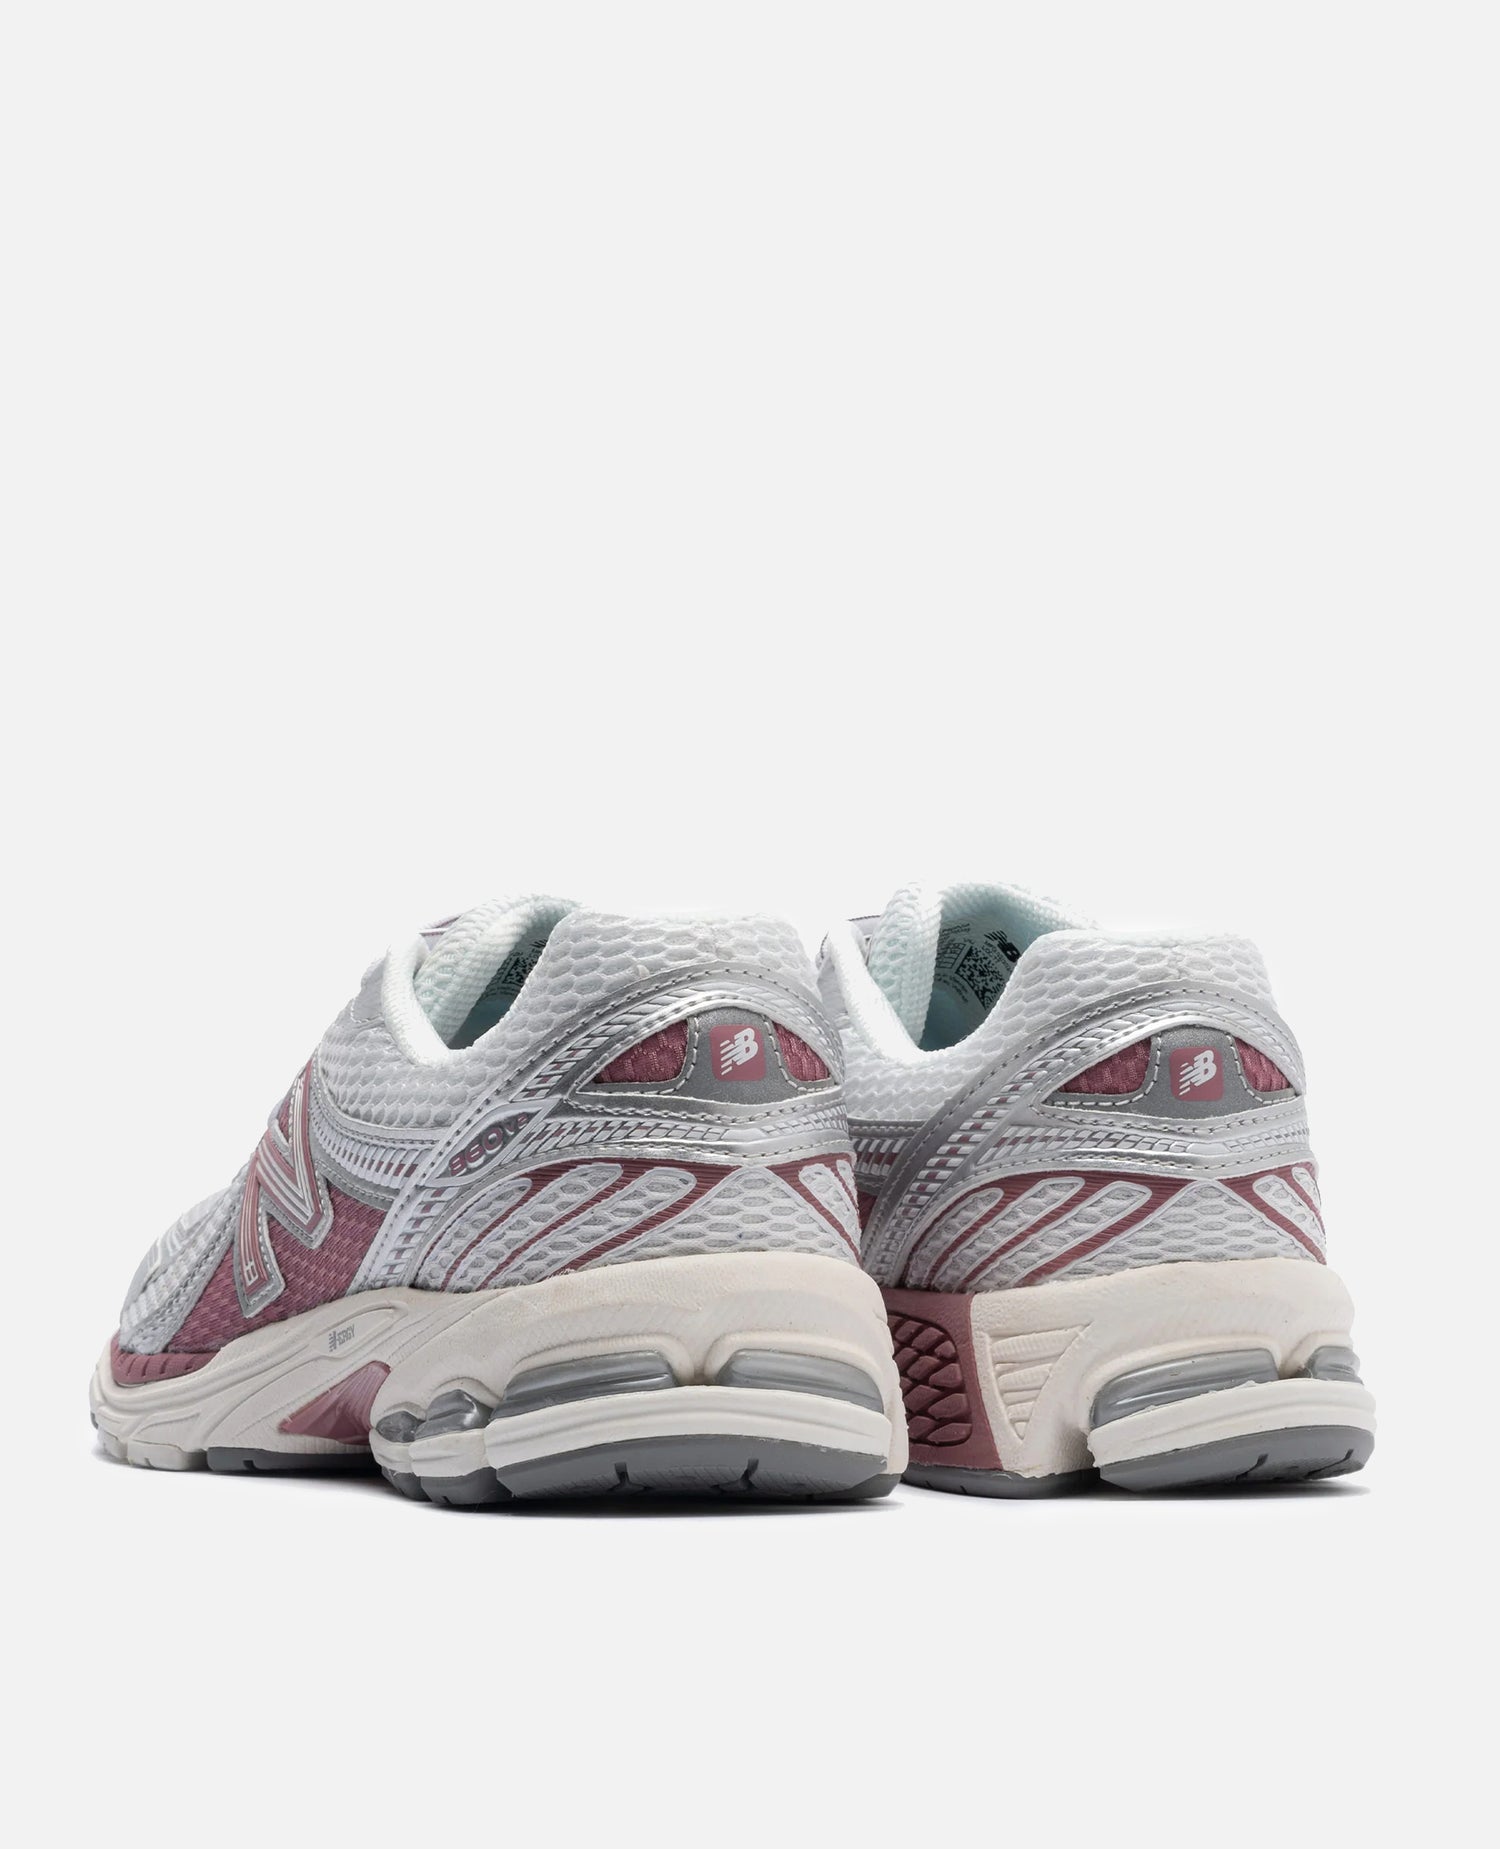 New Balance 860V2 Silver Toe Pink (White/Silver-Pink)